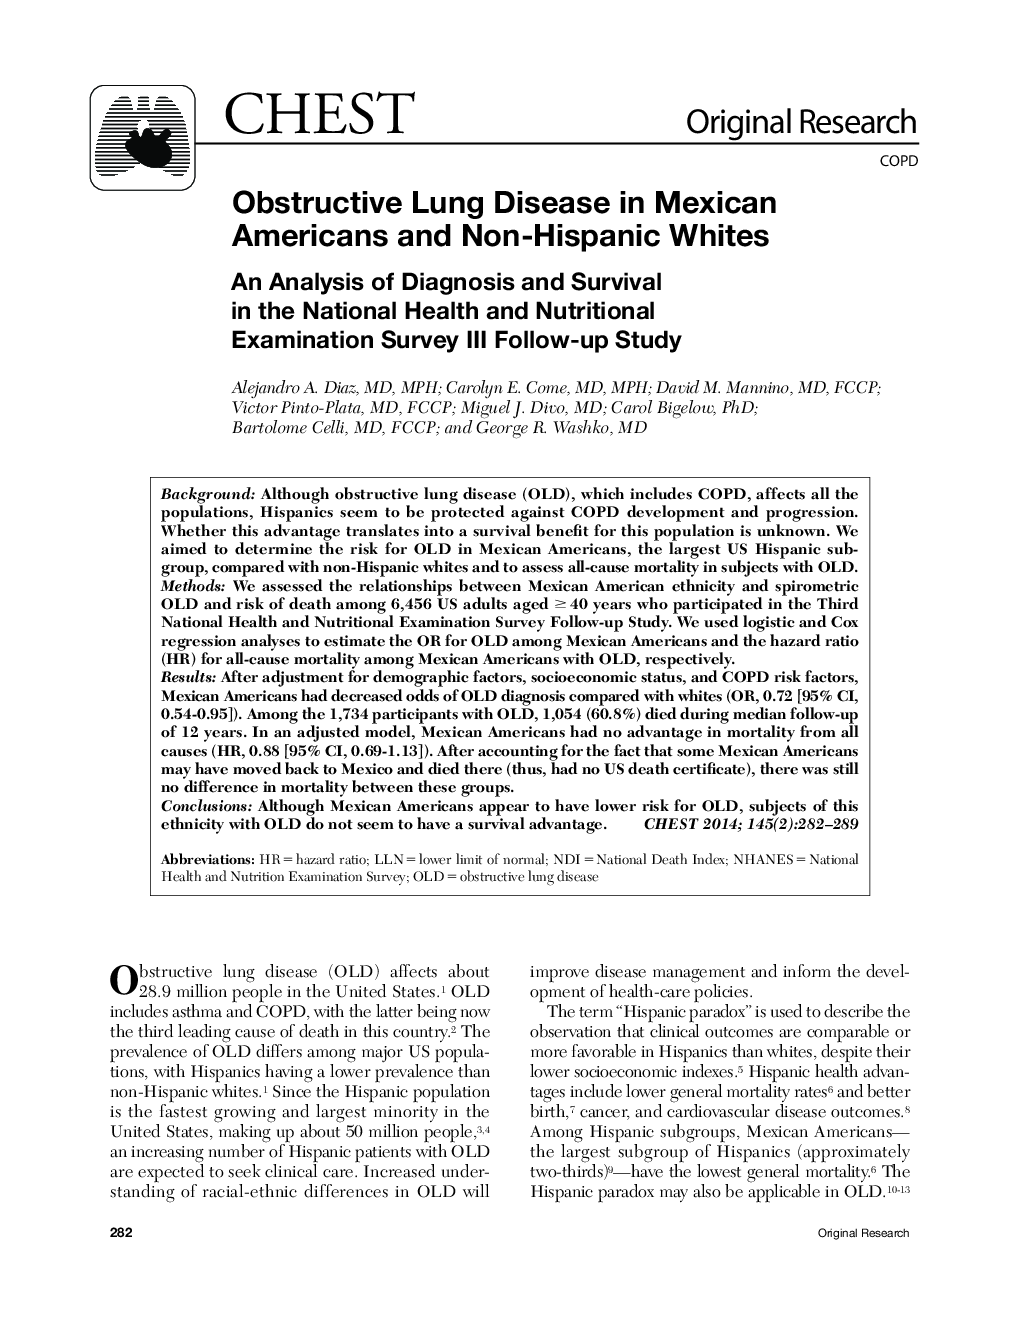 Obstructive Lung Disease in Mexican Americans and Non-Hispanic Whites